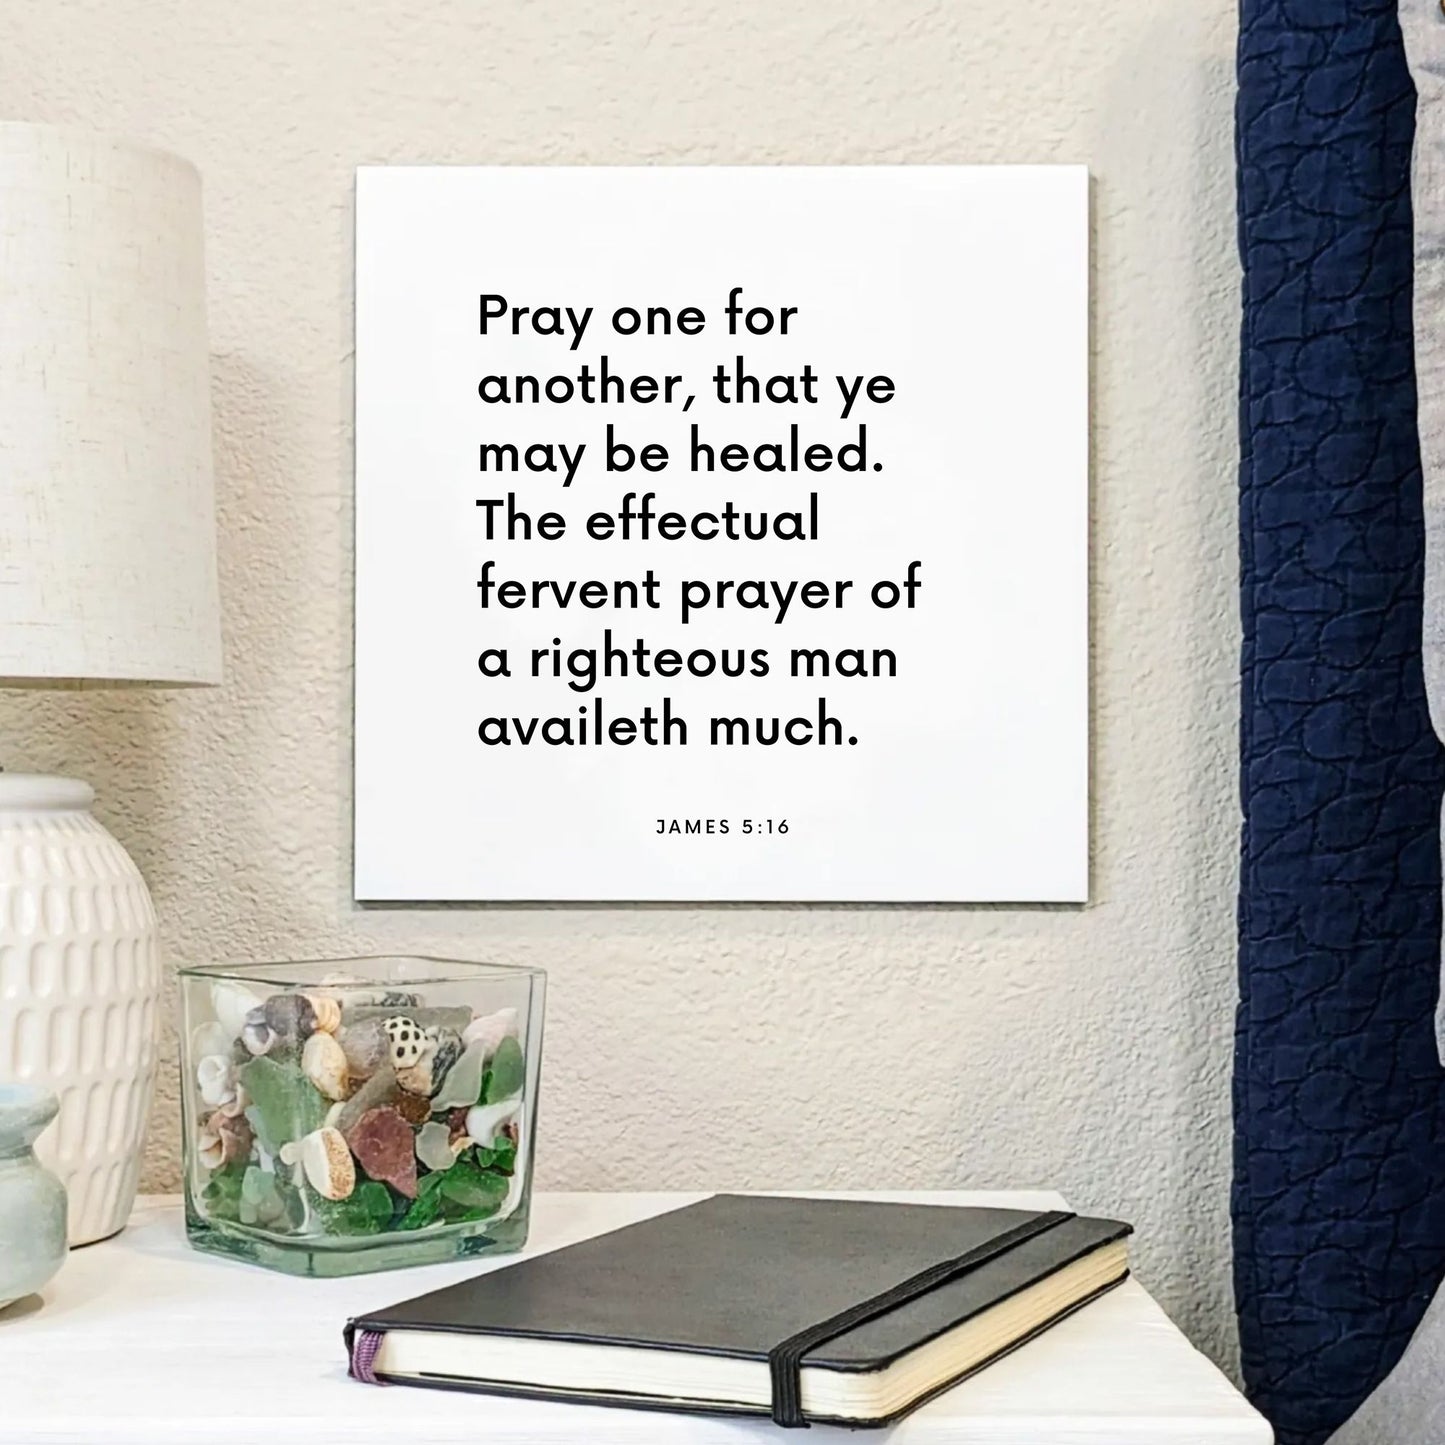 Bedside mouting of the scripture tile for James 5:16 - "Pray one for another, that ye may be healed"